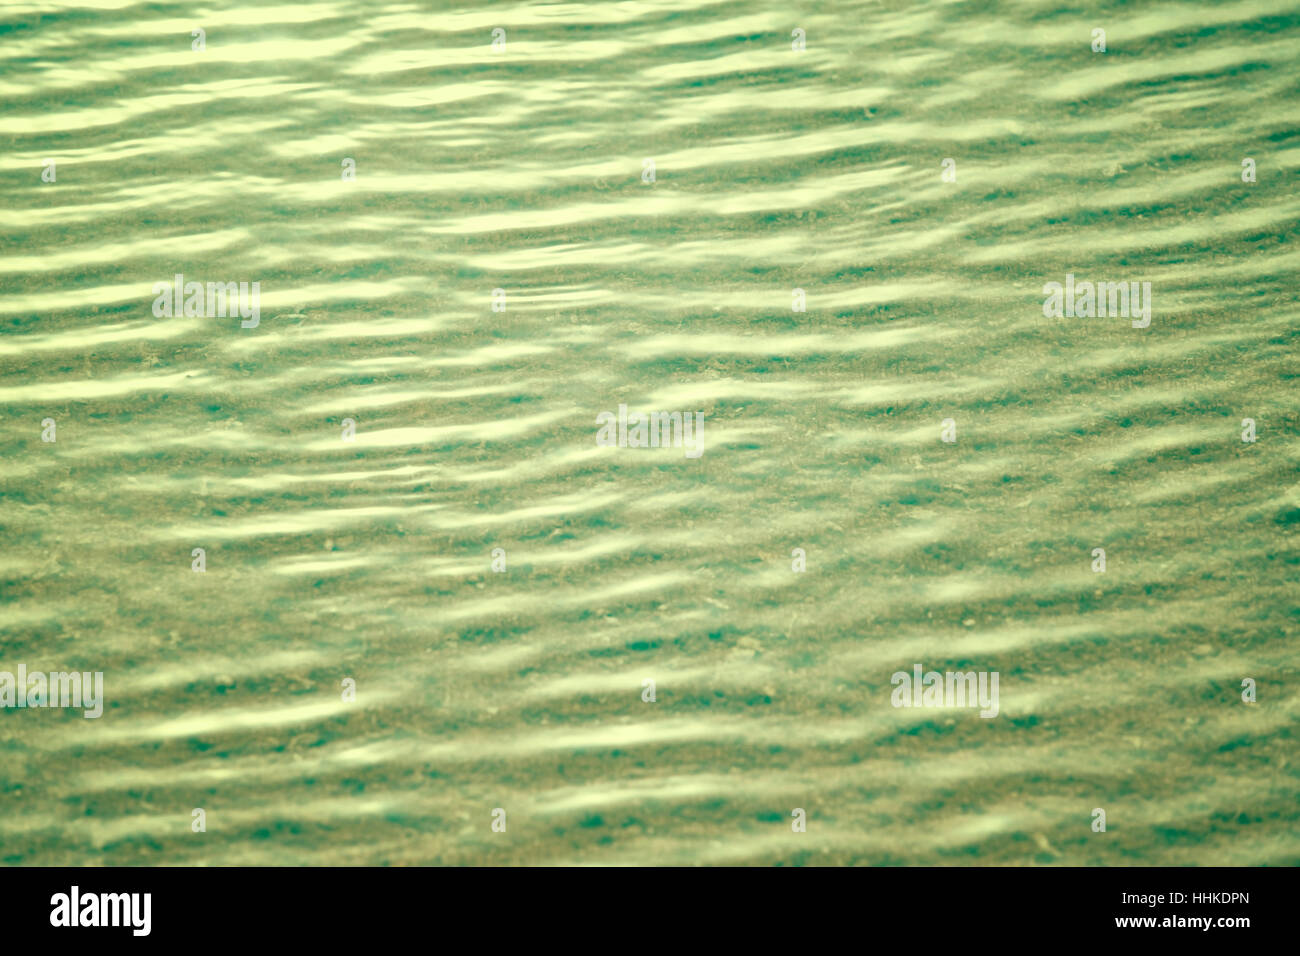 Green abstract natural background made of blurred waves. Stock Photo